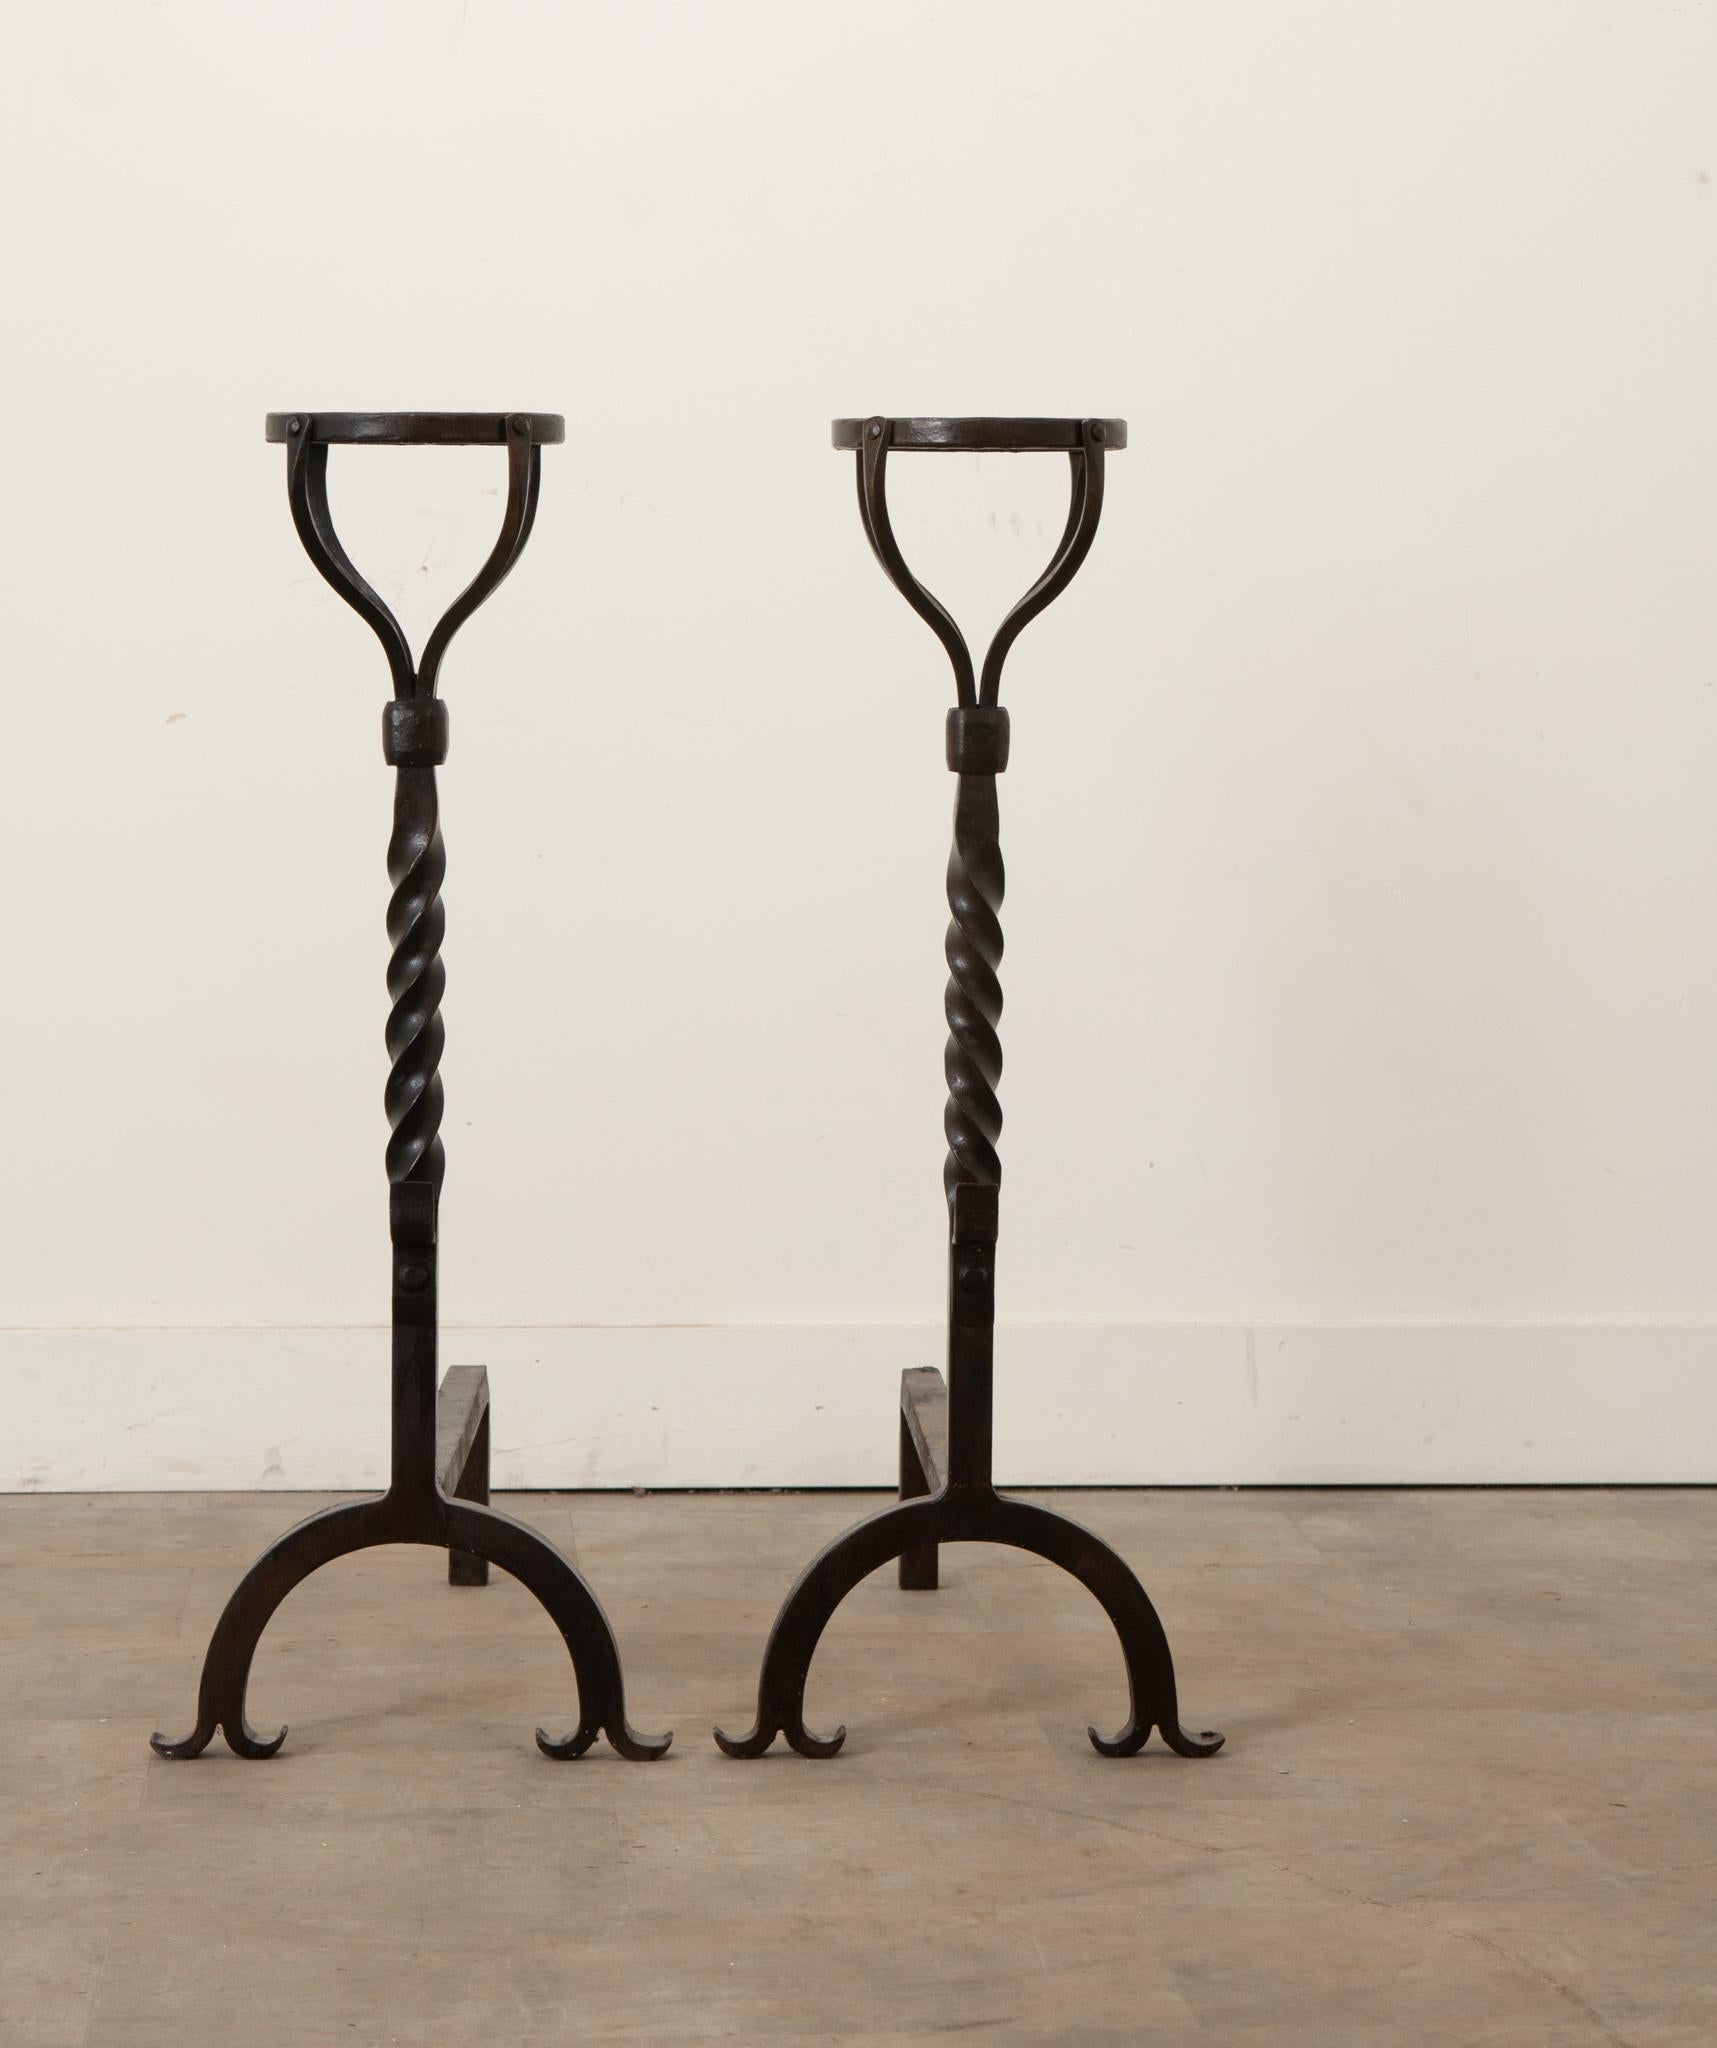 A French pair of hand forged iron andirons. Andirons are works of functional art that dress up your otherwise simple fireplace. Andirons or fire dogs were created to hold logs and for open hearth cooking. The tops of this pair of andirons have